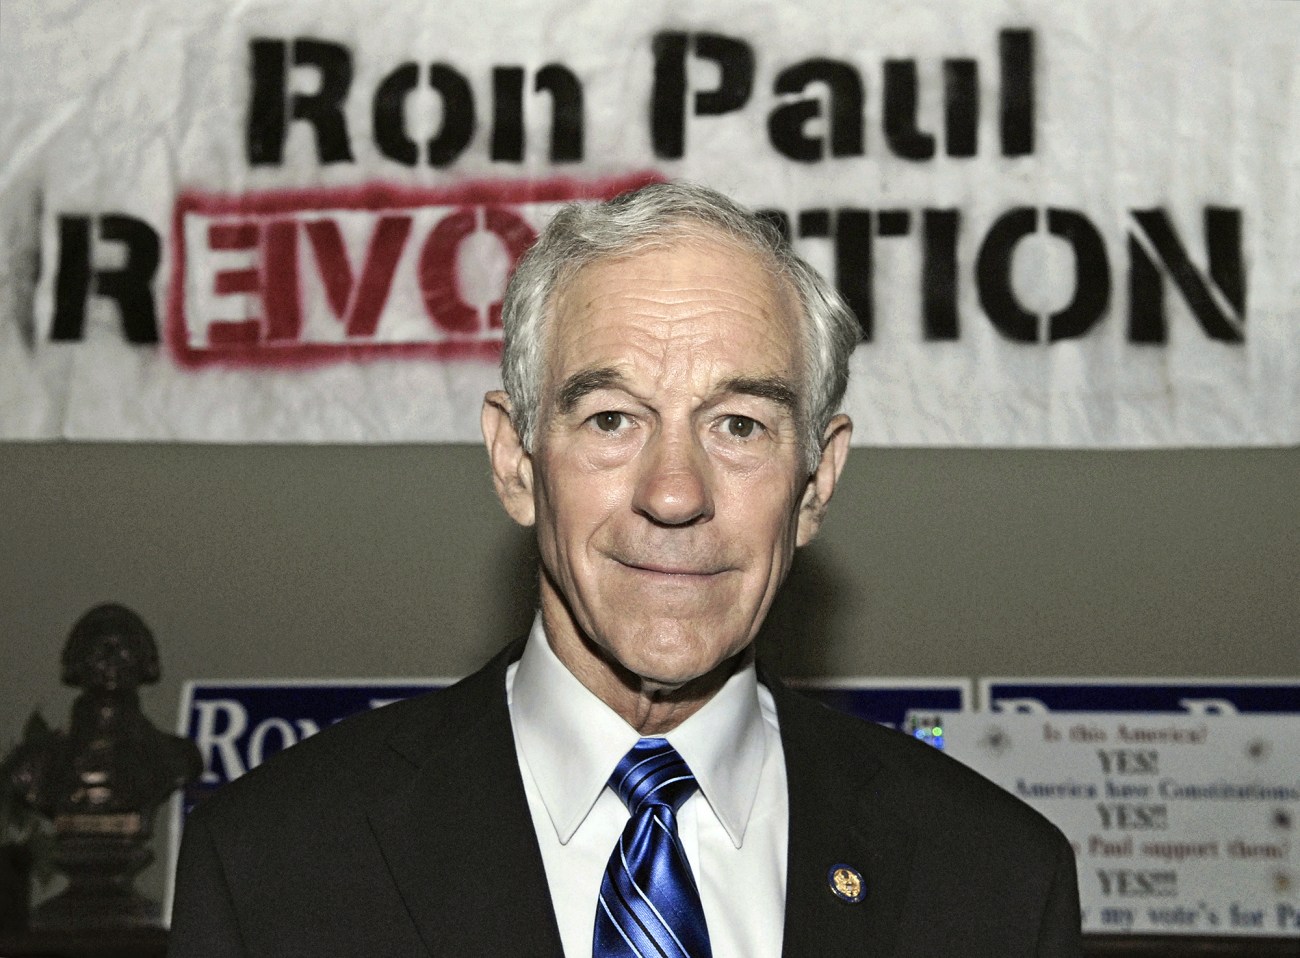 Ron Paul standing in front of a Ron Paul Revolution banner.